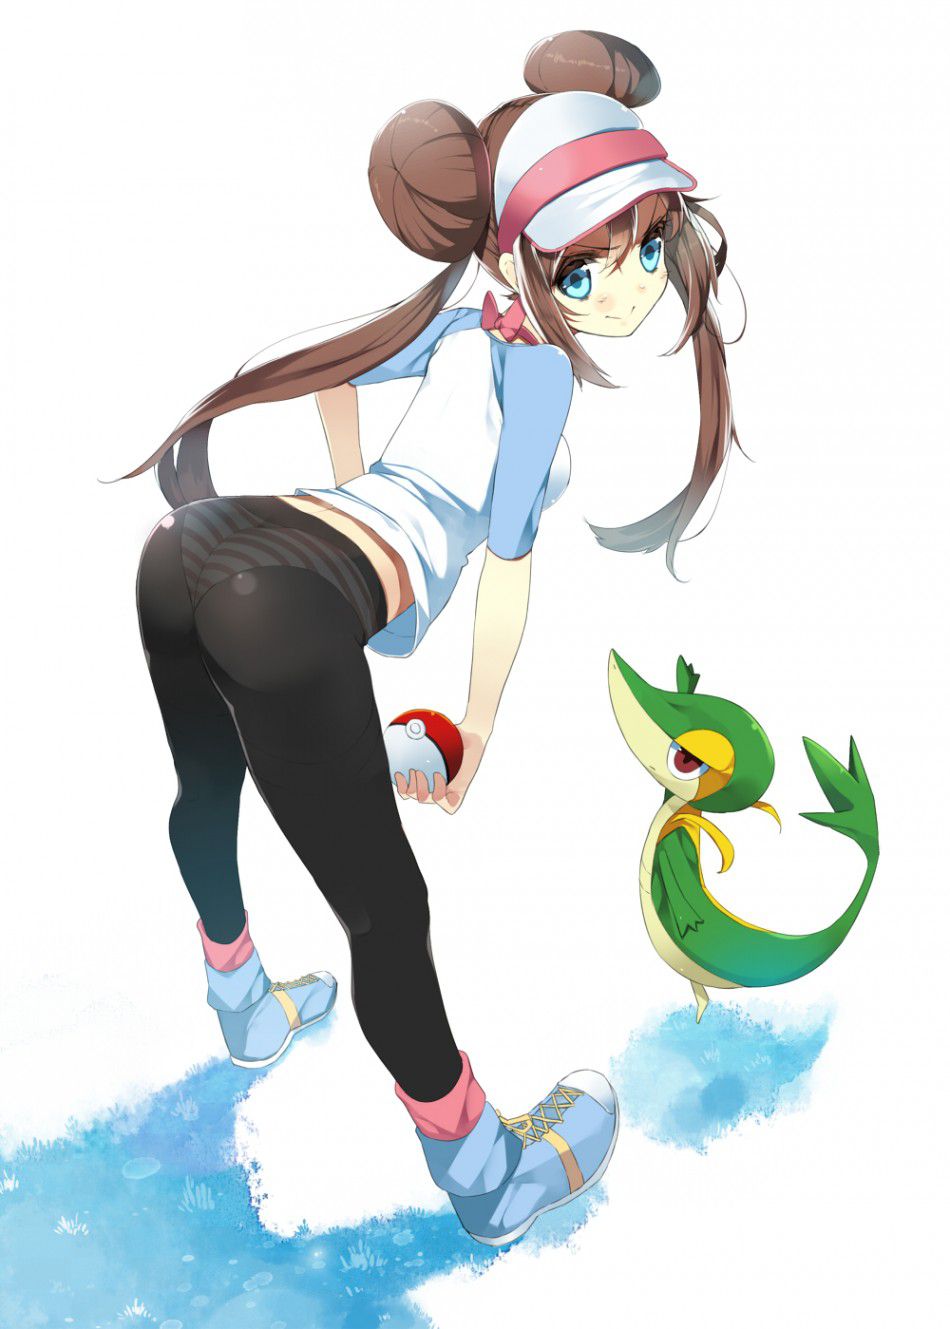 Naughty Girl Pokemon Trainer that's packed with erotic images Pack vol.5 35